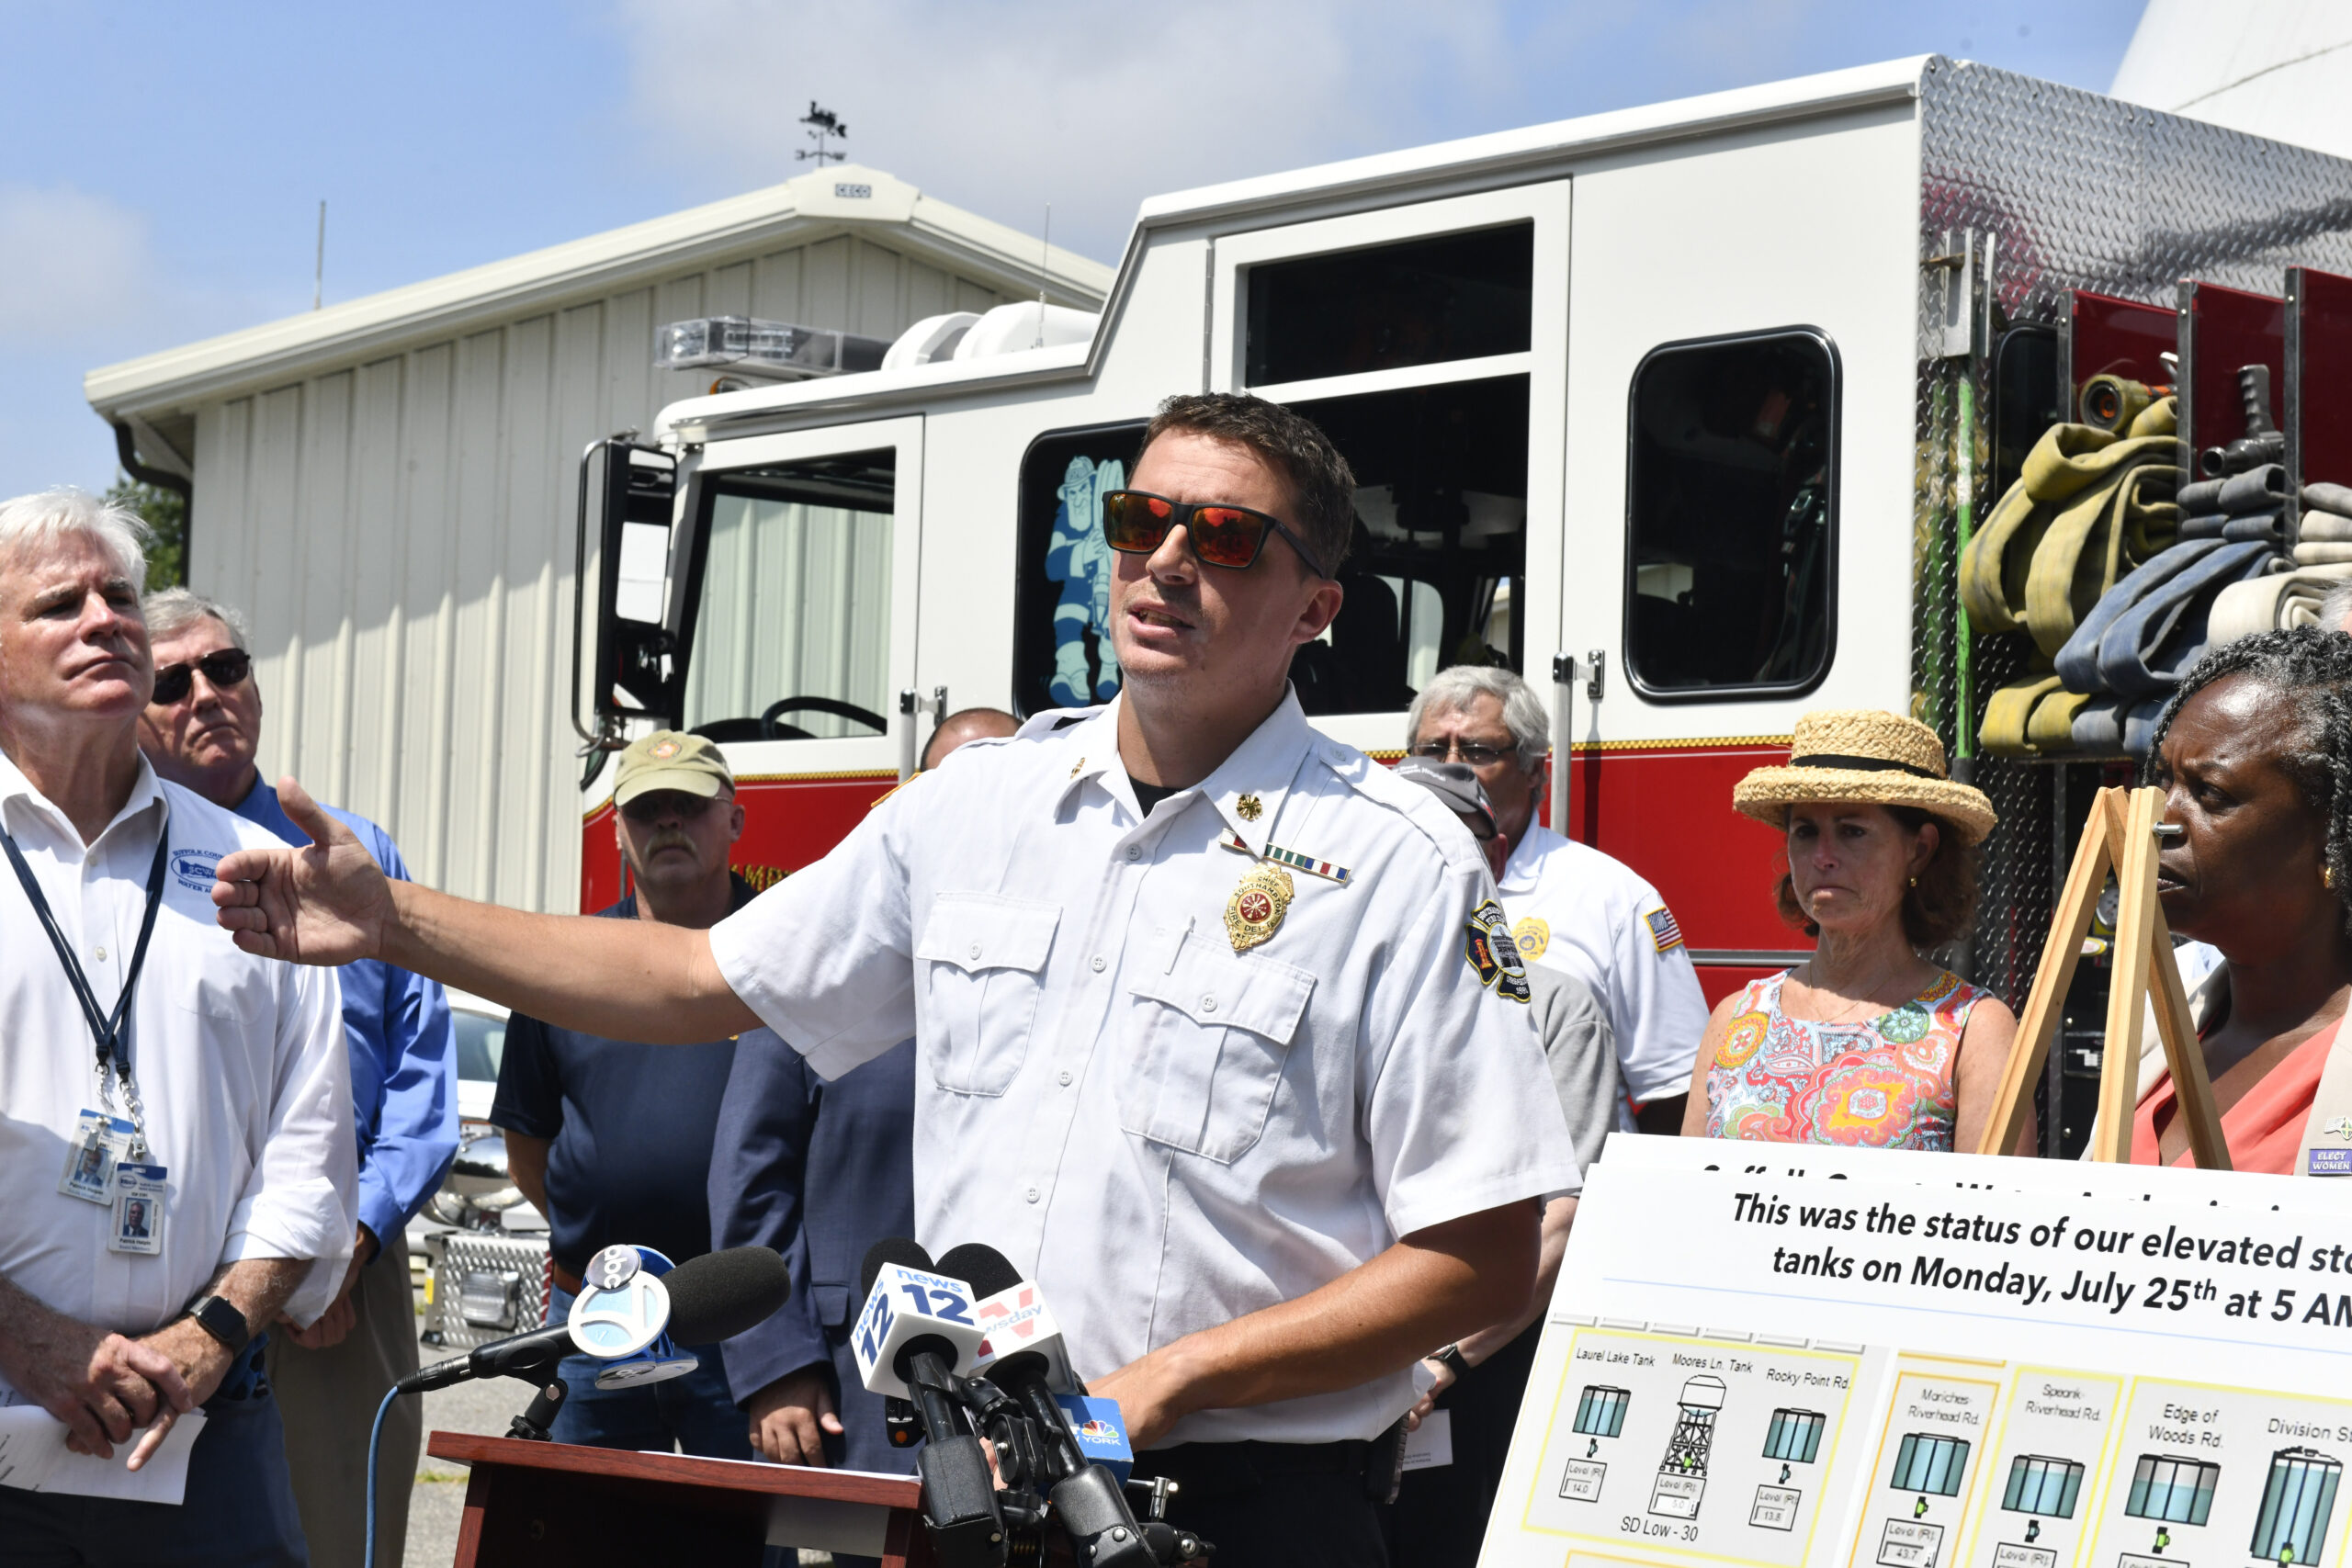 Southampton Fire Department Chief Alfred Callahan III speaks at a press conference on Tuesday.  DANA SHAW